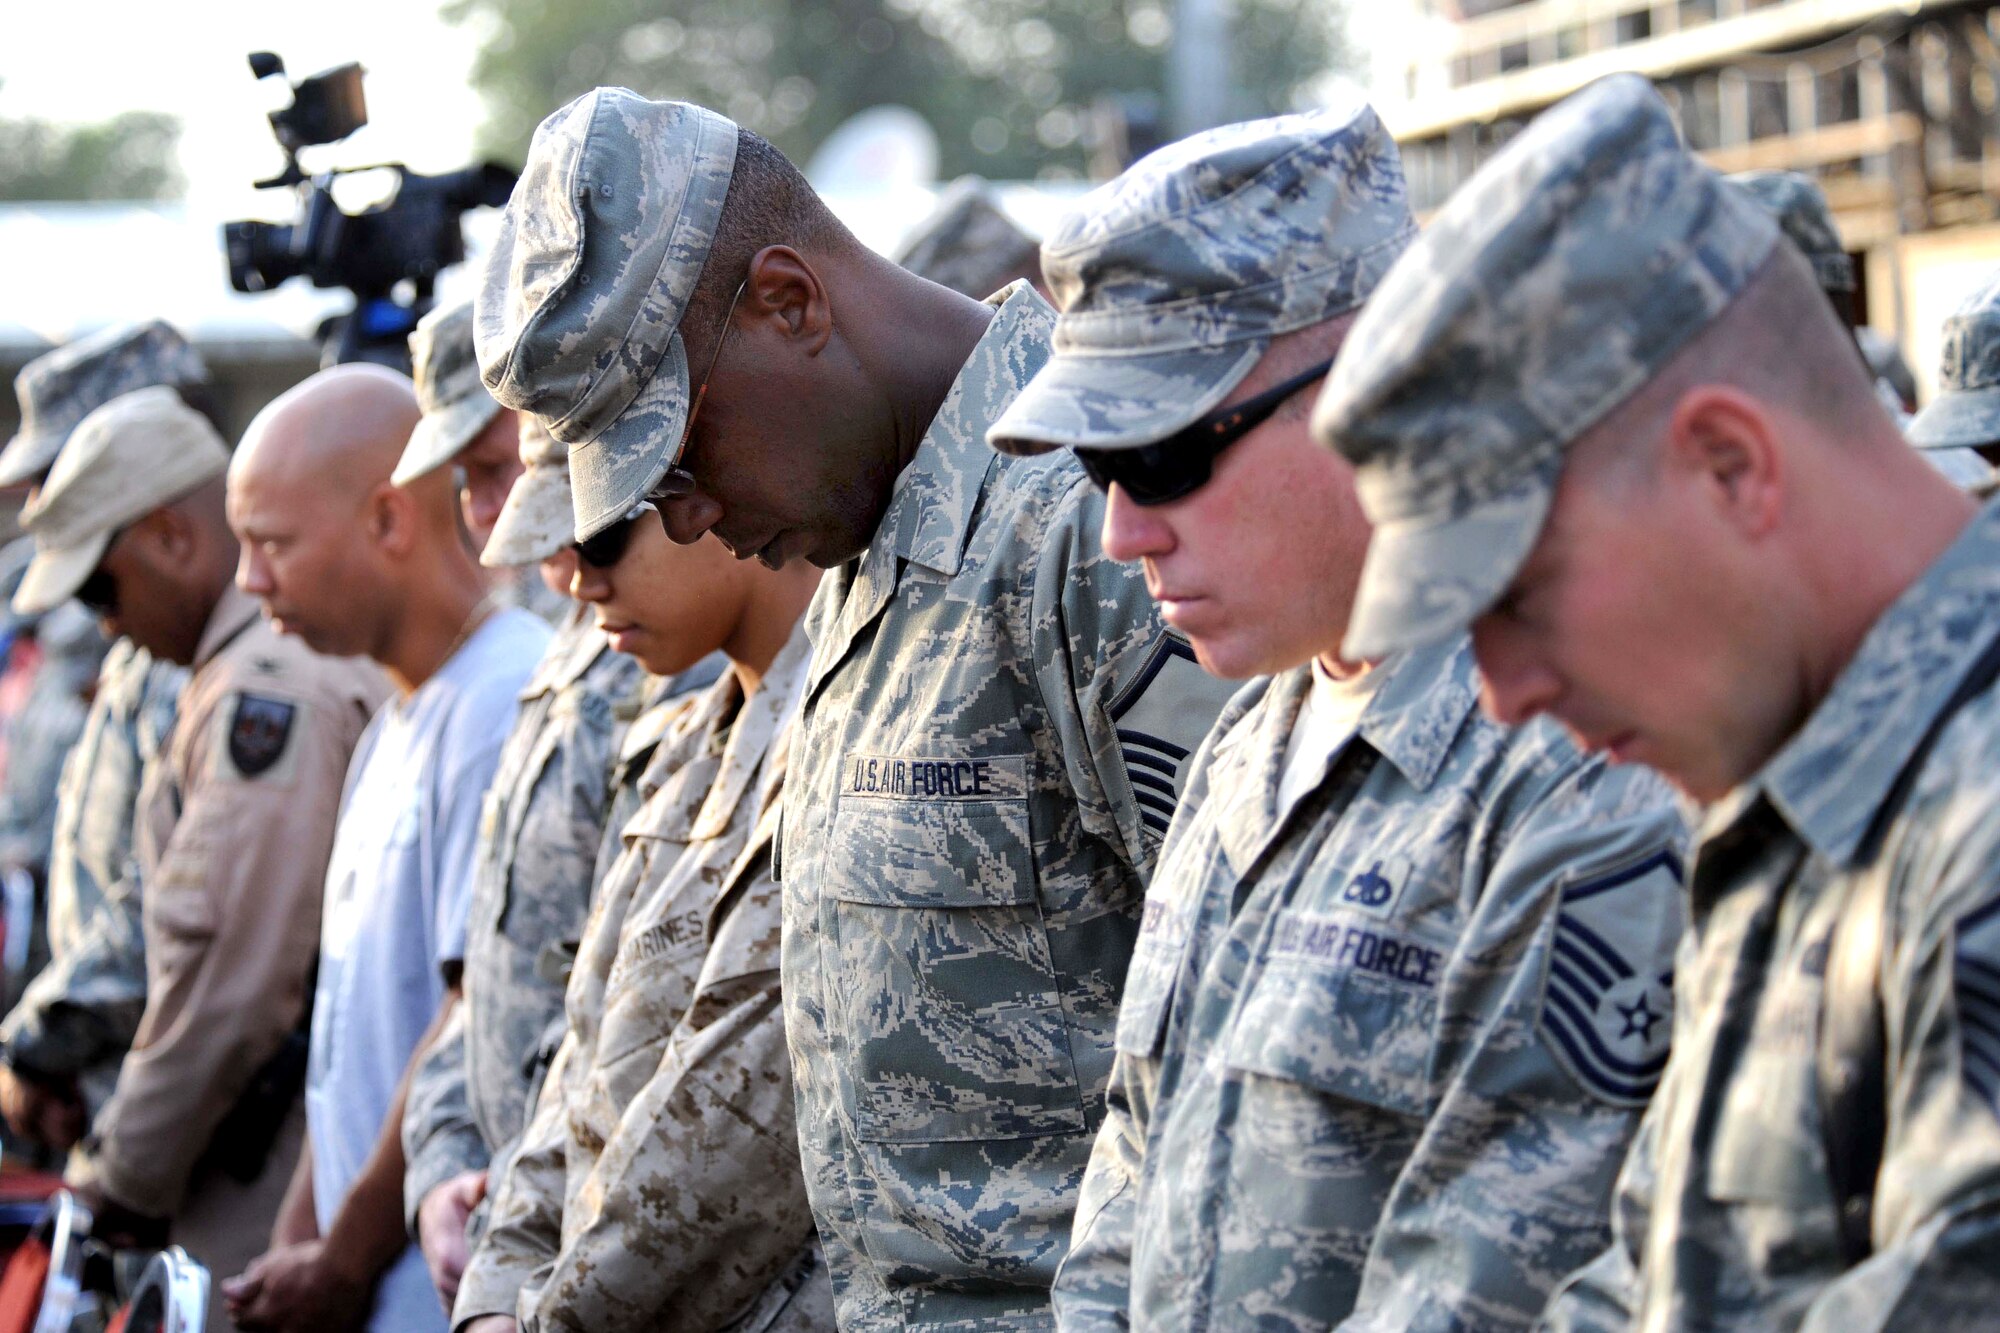 CAMP EGGERS, Afghanistan - Service members from all branches of the U.S. Armed Forces assigned to the Combined Security Transition Command - Afghanistan, pay their respects during a 2009 9/11 remembrance ceremony. Various 9/11 remembrance events are scheduled in the area for people to attend. Department of Defense photo